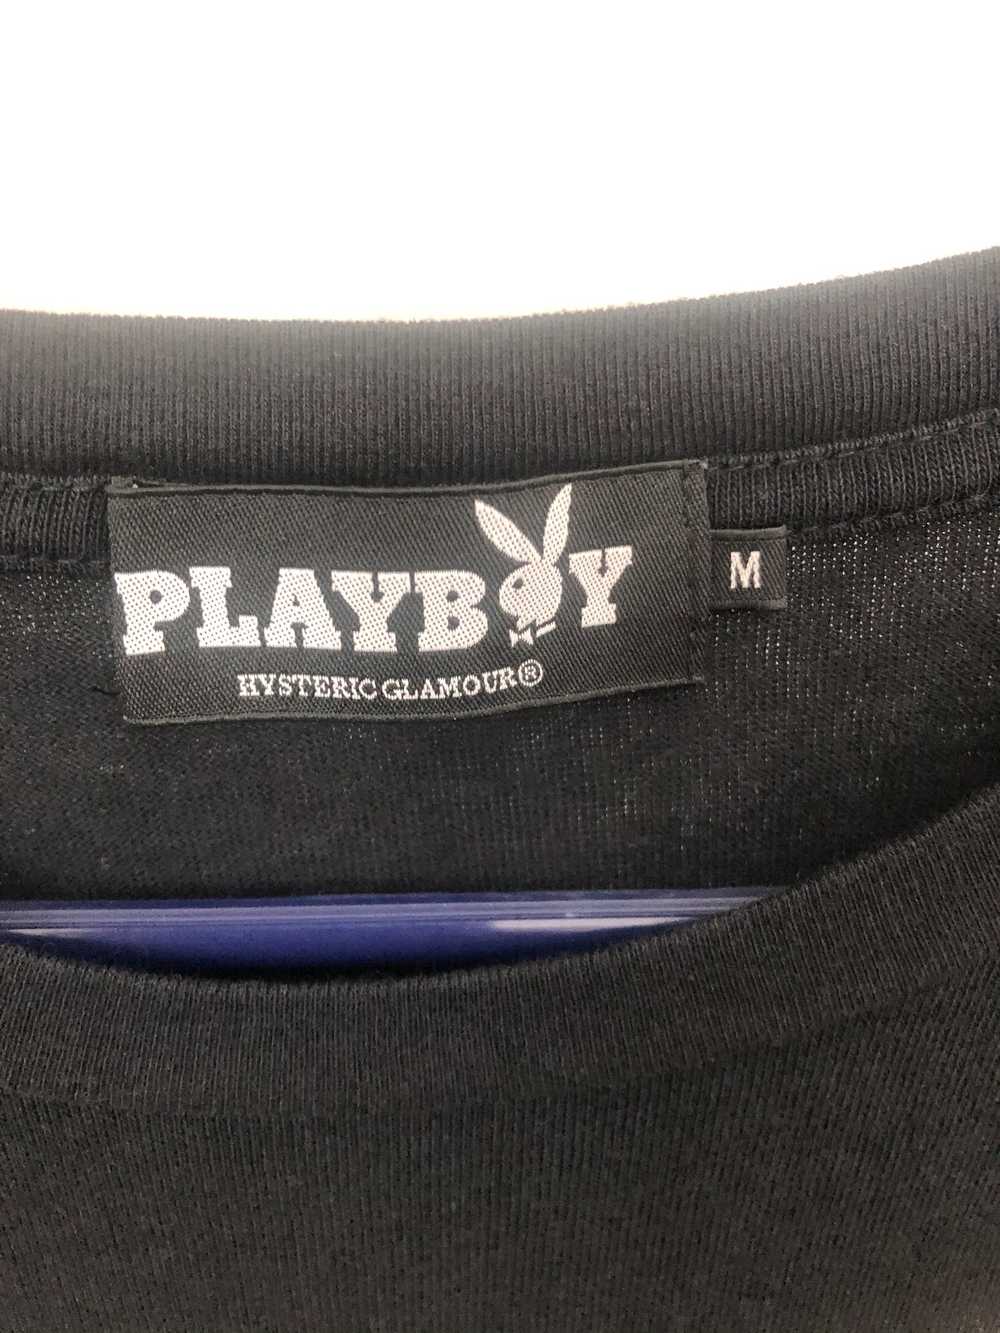 Hysteric Glamour × Playboy Hysteric Glamour x Pla… - image 2